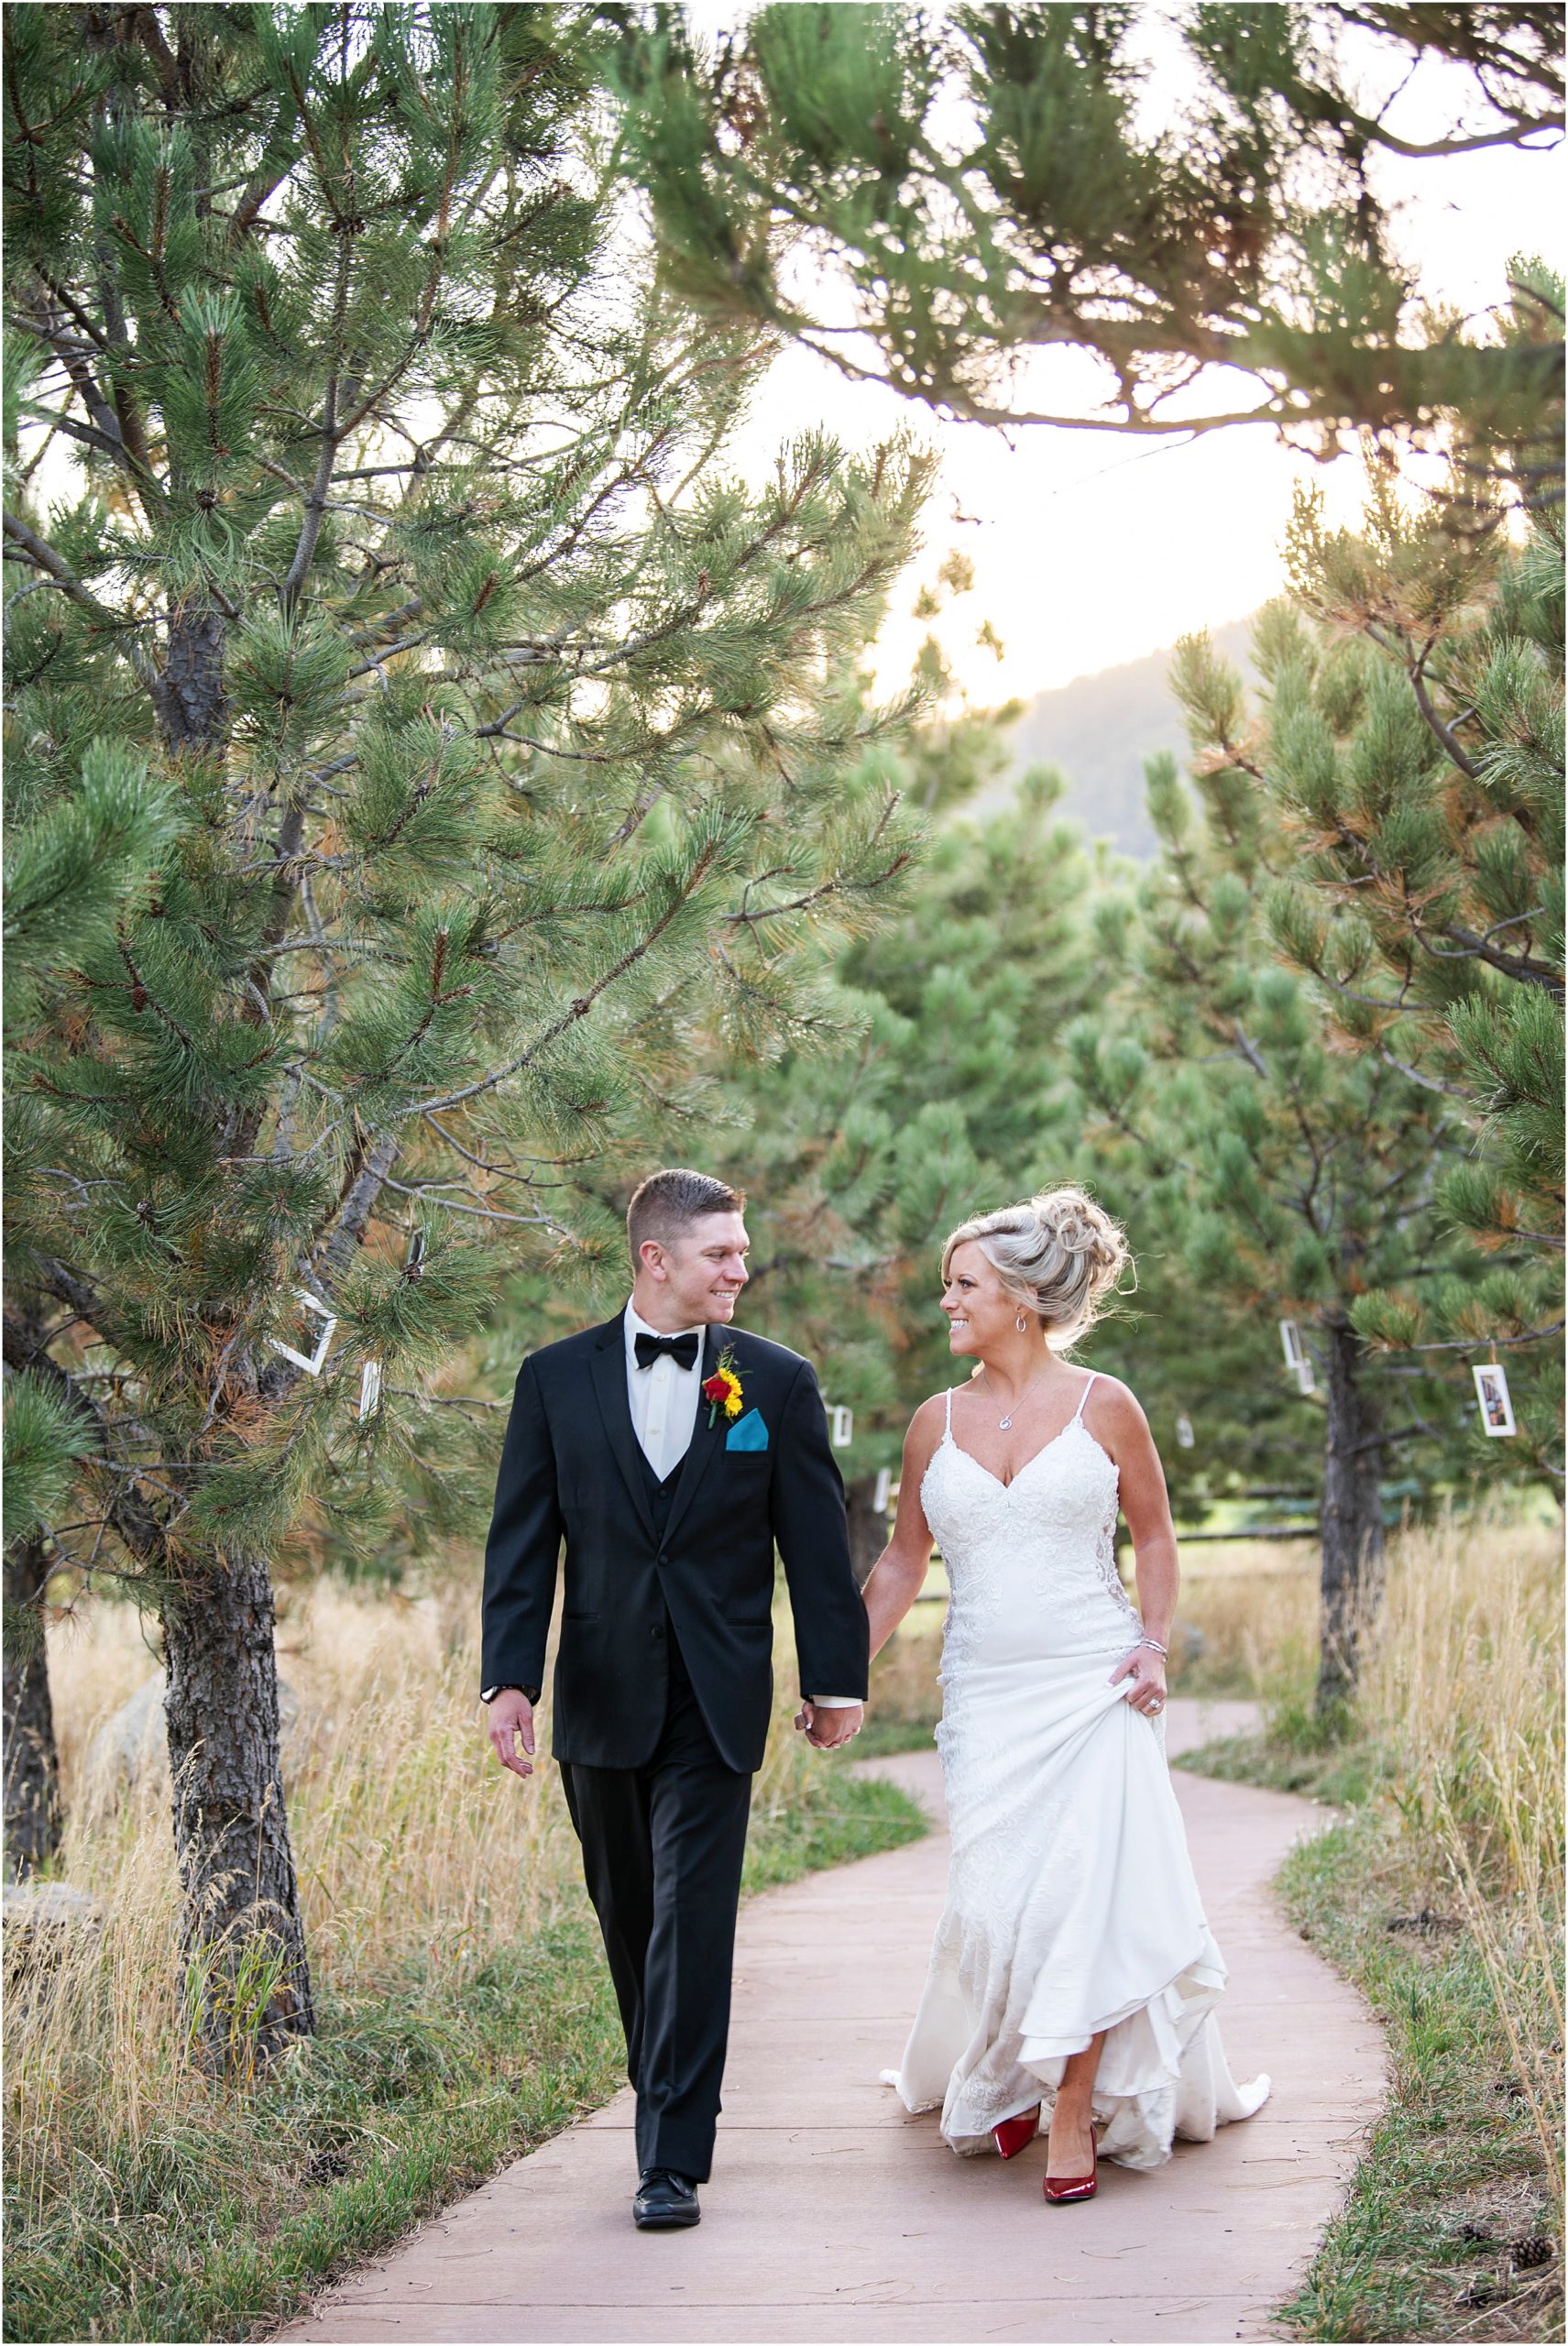 Bride and groom walk and hold hands down a cement path through trees smiling at each other